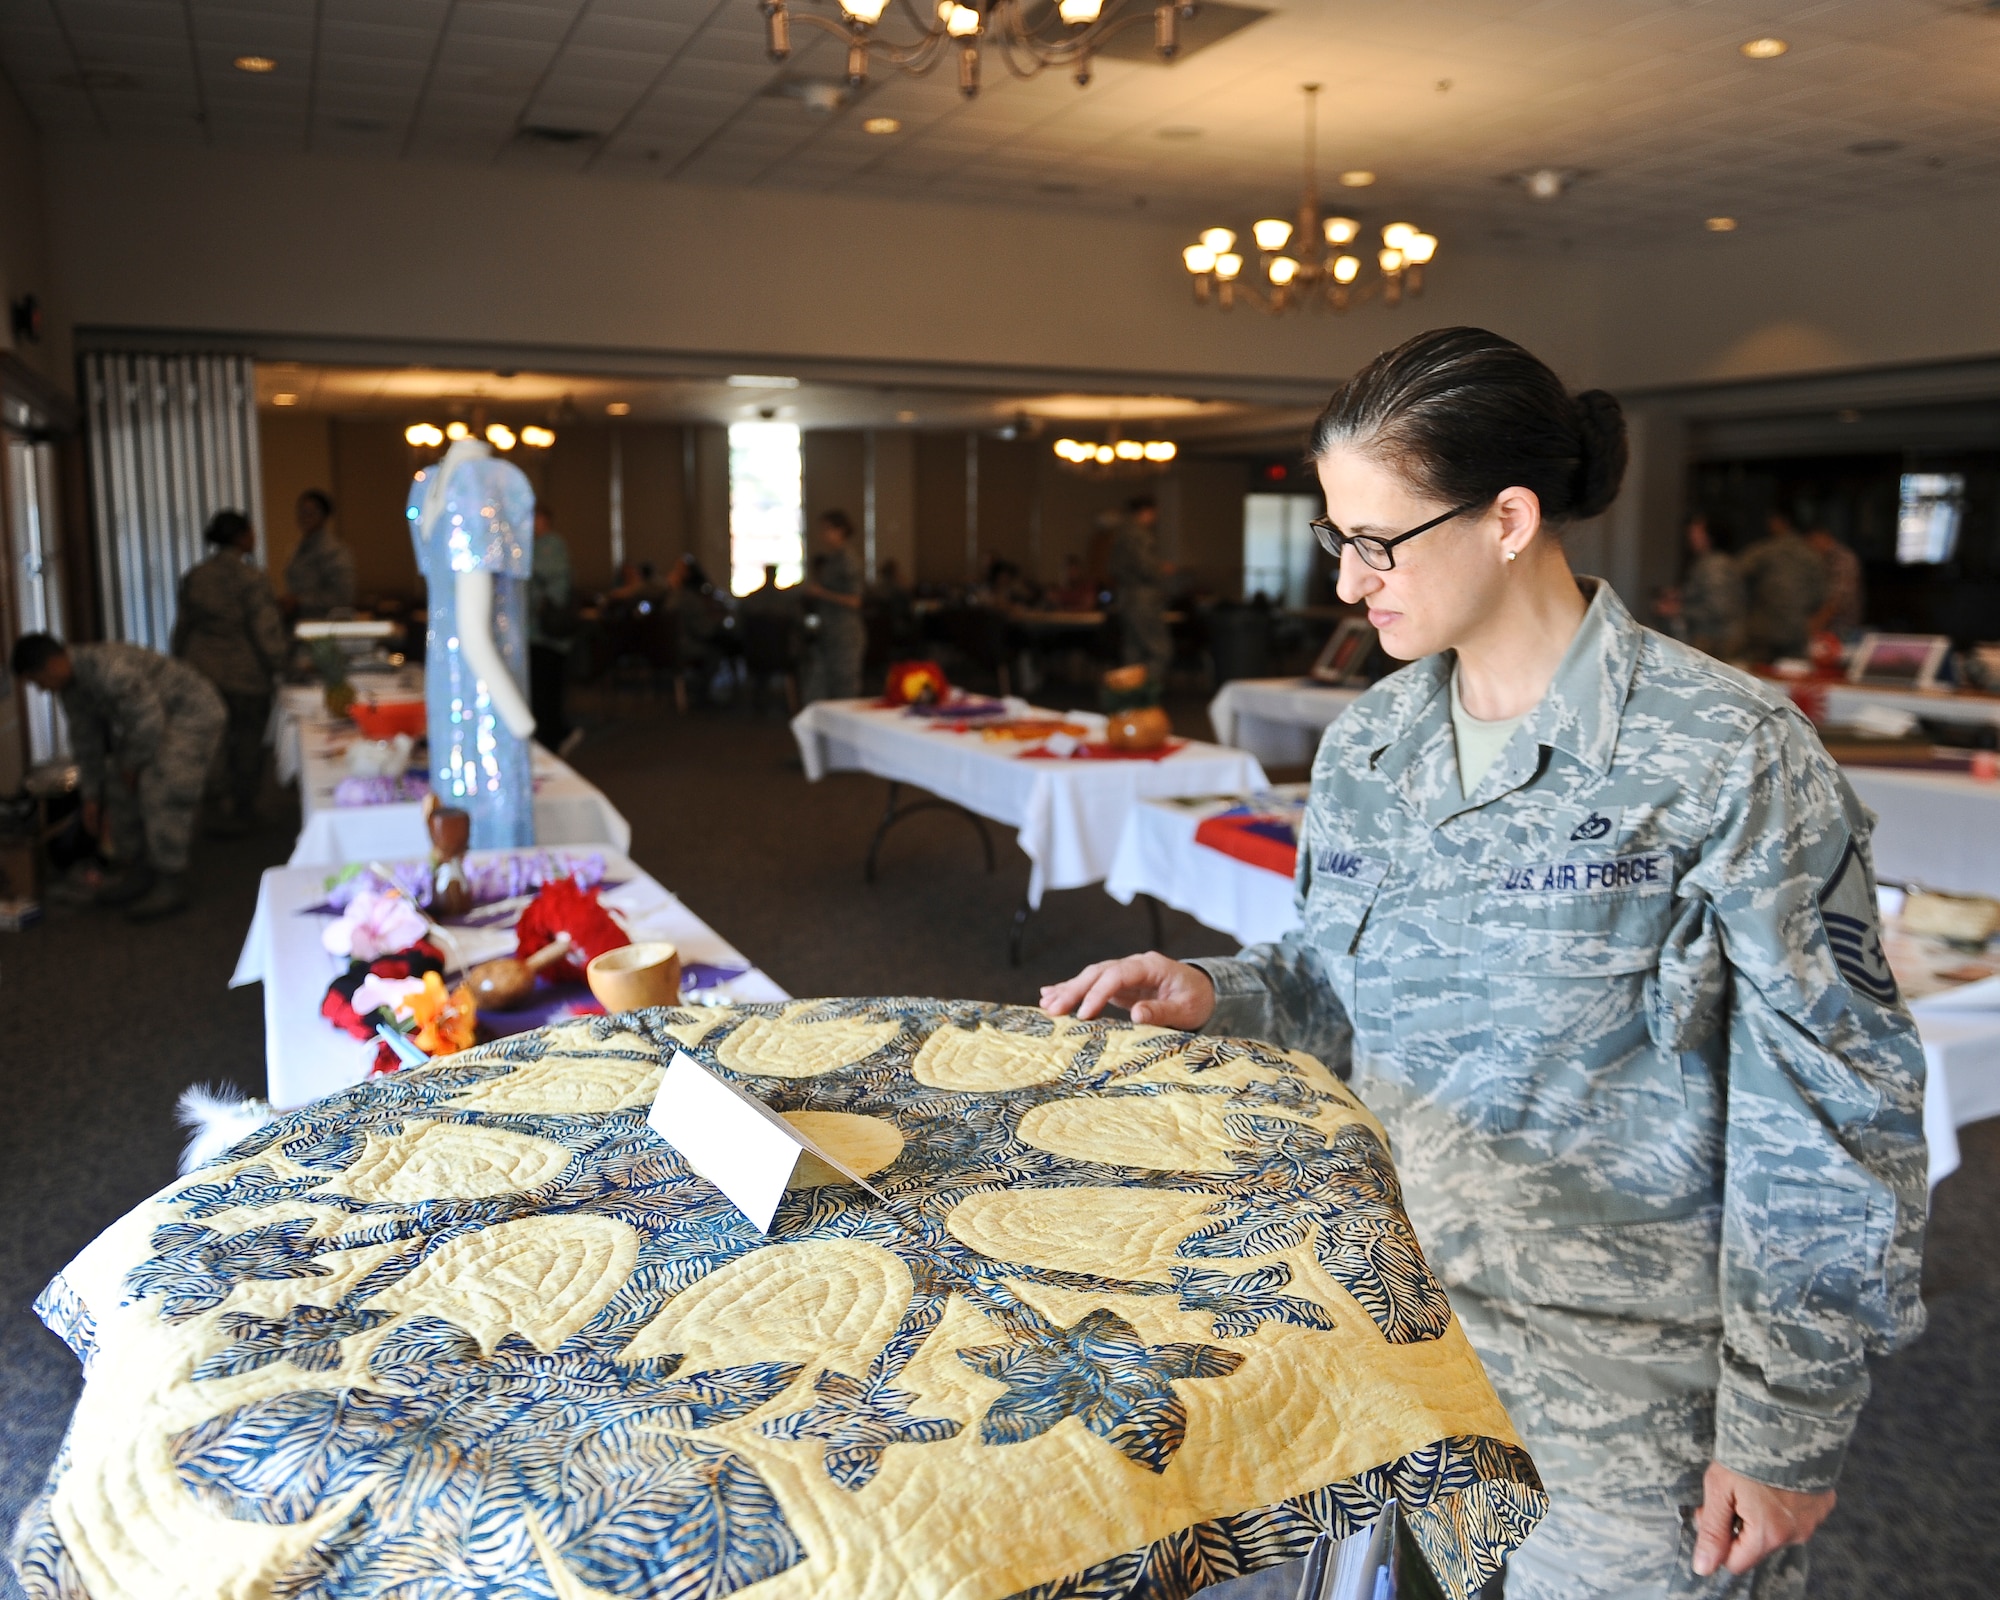 U.S. Air Force Master Sgt. Elizabeth Williams, 7th Civil Engineer Squadron, views a Hawaiian Naupaka quilt at the Tour of Asia and the Pacific Islands Art Expo May 8, 2014, at Dyess Air Force Base, Texas. The quilt was handmade in the design of a Naupaka flower, which is a shrub found in Hawaii’s mountains and near its beaches. (U.S. Air Force photo by Airman 1st Class Kedesha Pennant/Released)